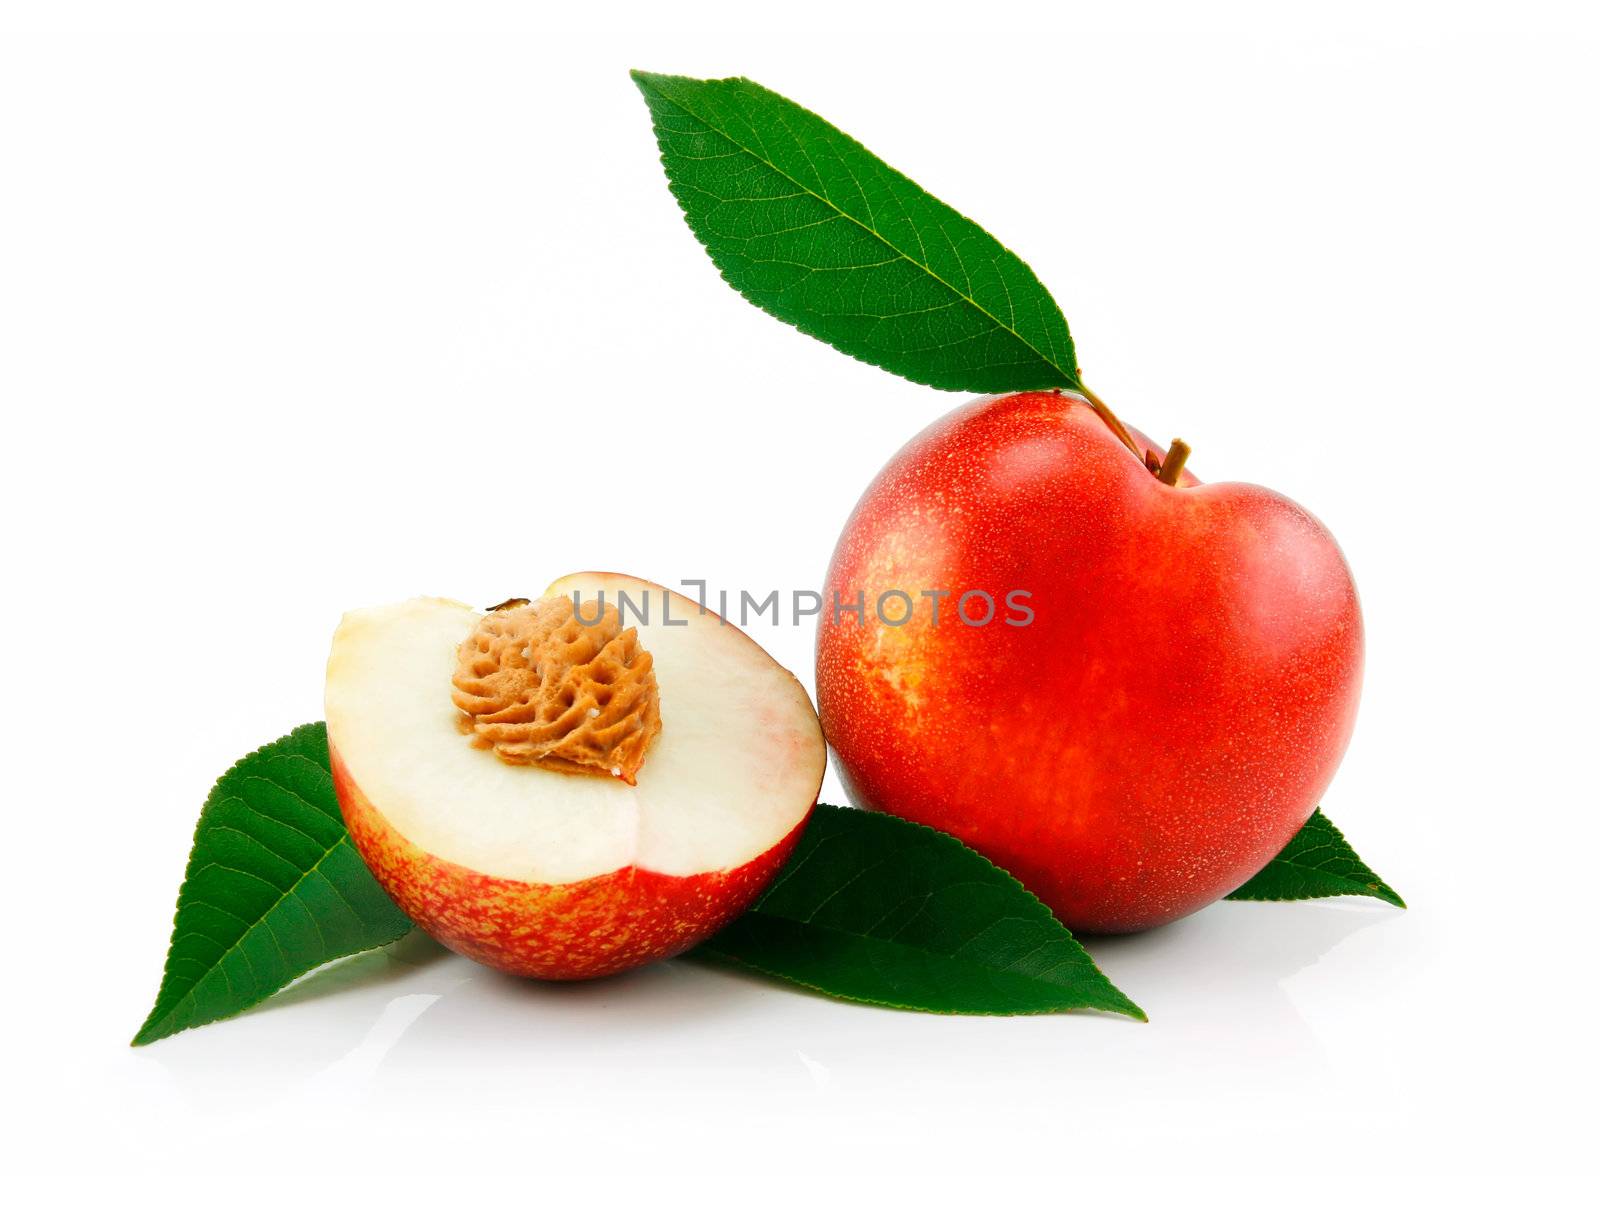 Ripe Sliced Peach (Nectarine) with Green Leafs Isolated on White Background